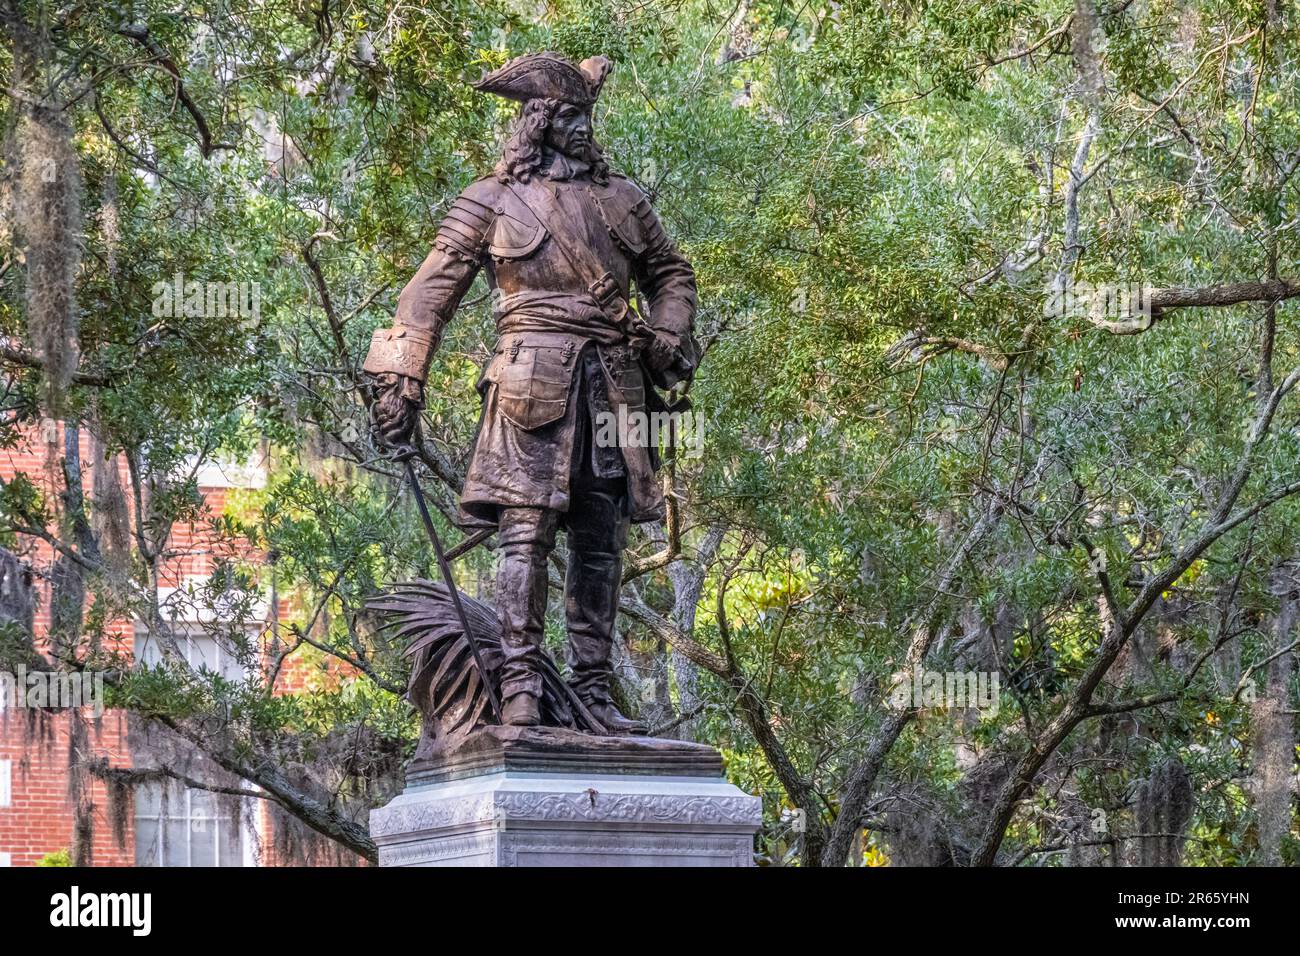 Statue of General James Oglethorpe, founder of the Colony of Georgia, at Chippewa Square in the historical district of Savannah, Georgia. (USA) Stock Photo